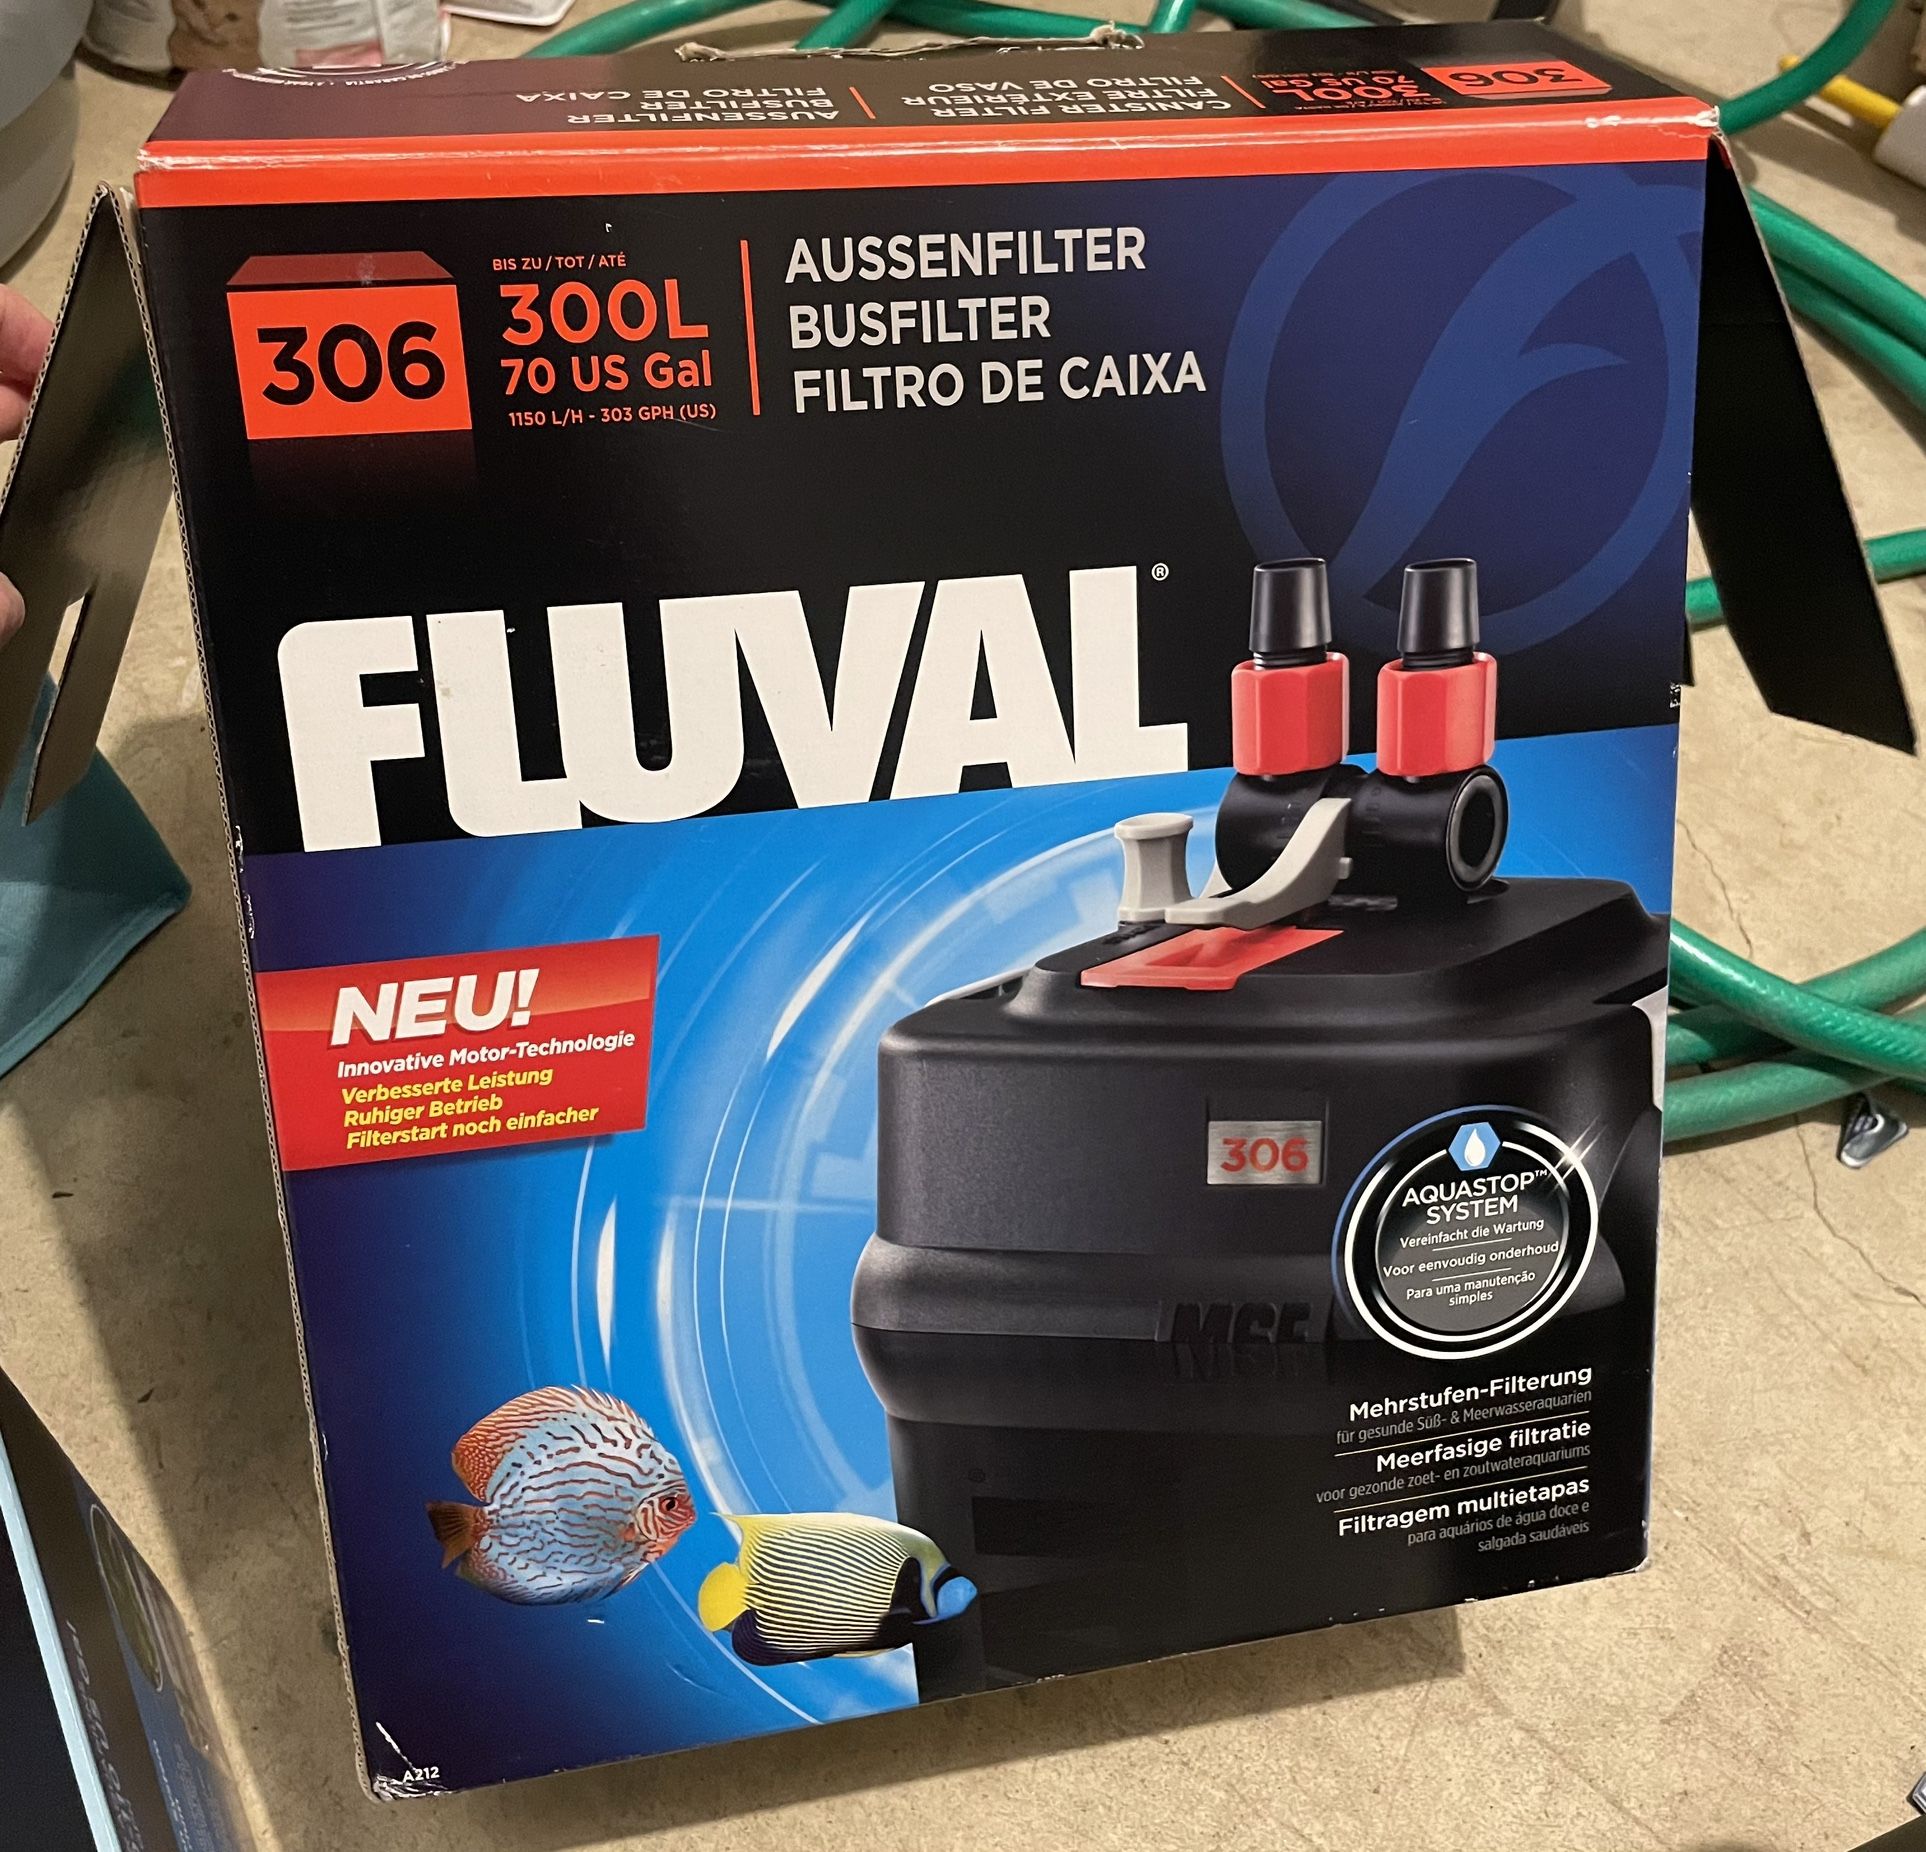 PARTS ONLY Fluval 306 Cannister Filter For 70 Gallon Aquarium Fish Tank. RT